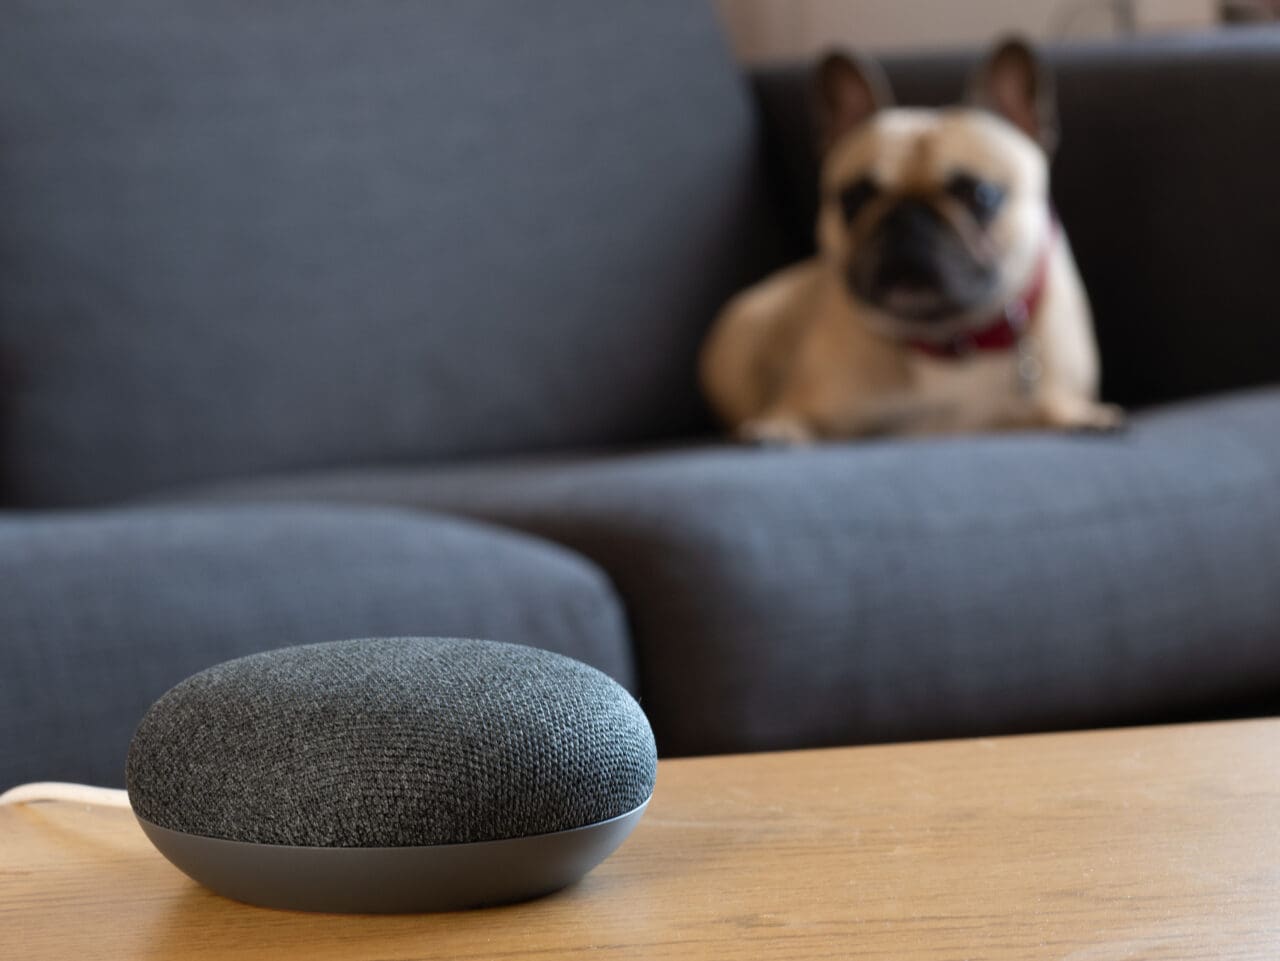 smart home speaker device placed on wooden table with blurred background of a dog on a sofa